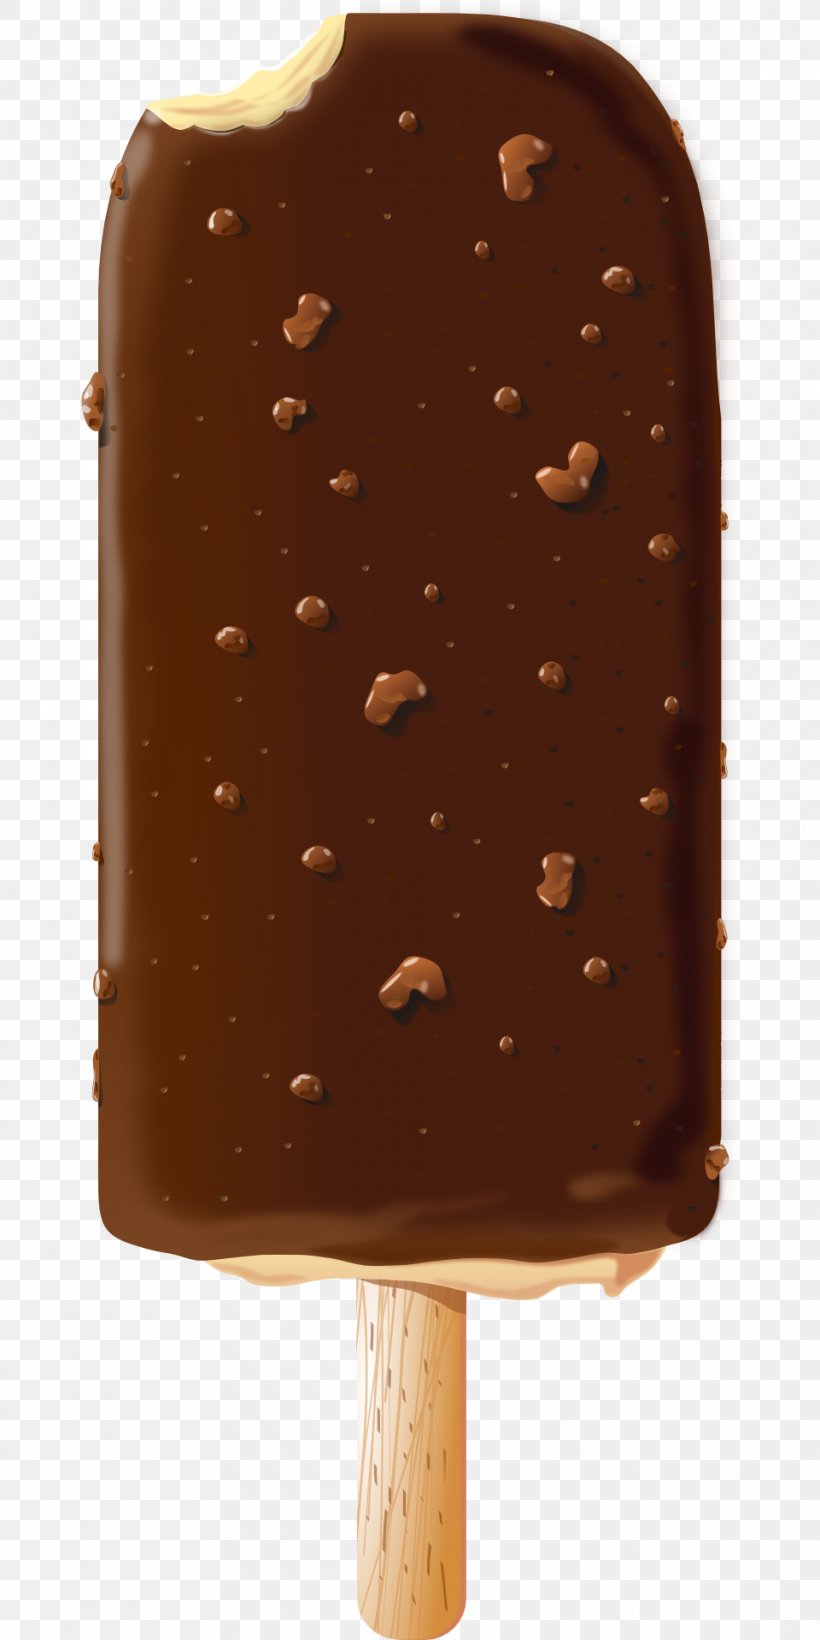 Chocolate Ice Cream Lollipop Ice Pop, PNG, 960x1920px, Ice Cream, Brown, Chocolate, Chocolate Ice Cream, Chocolate Syrup Download Free